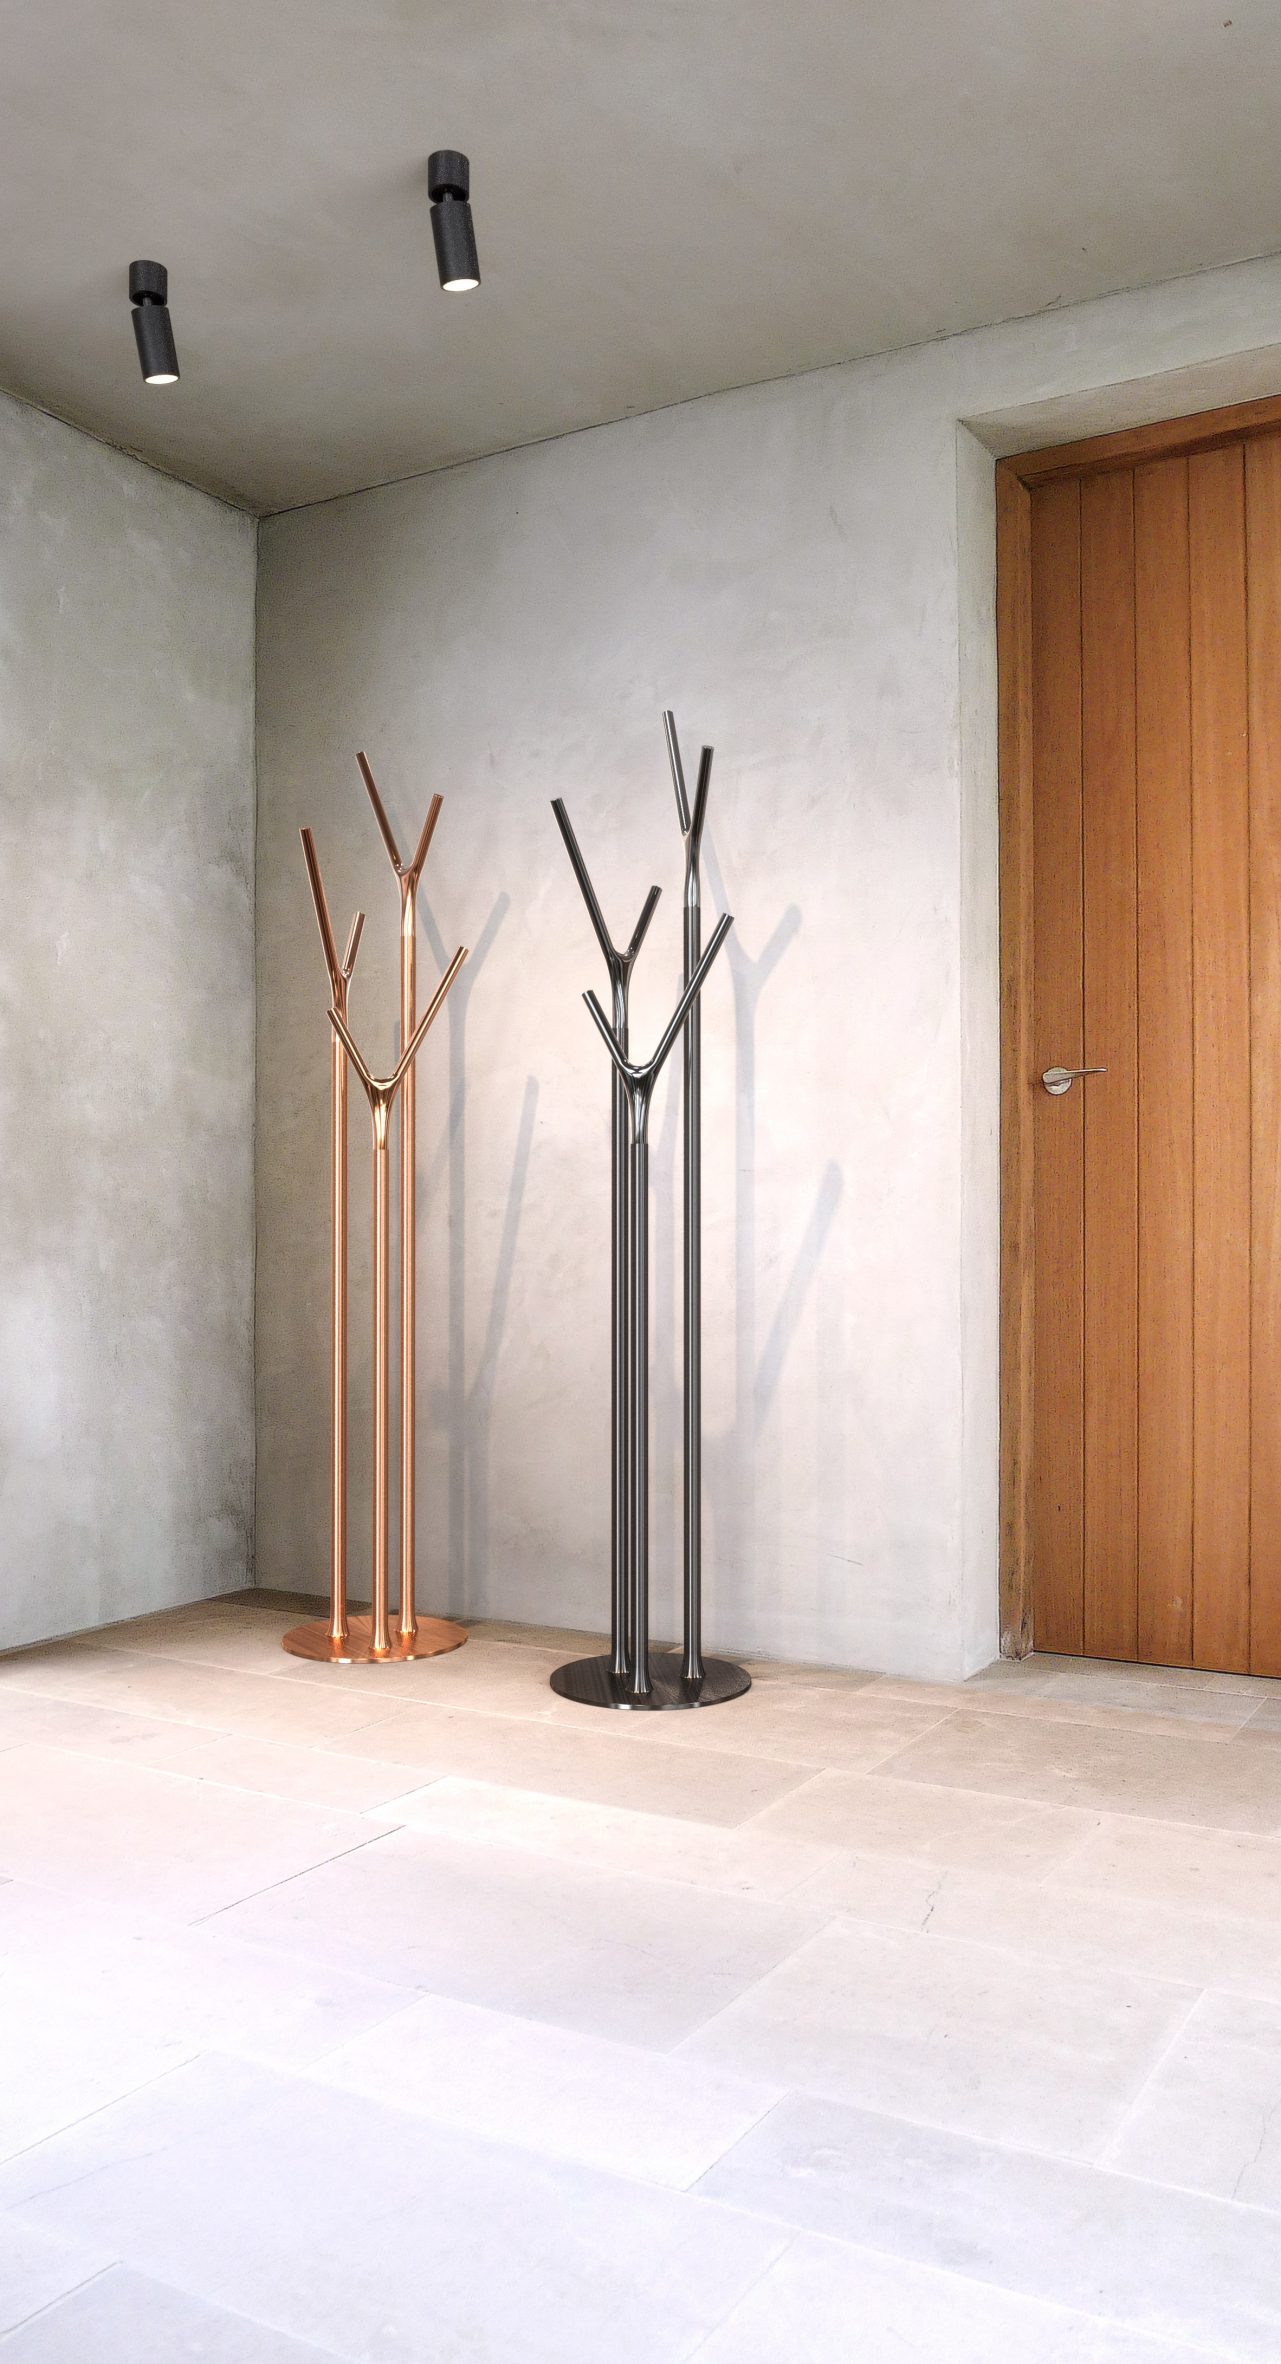 Photo of two Wishbone hall stands in copper and black colours in the corner of a room